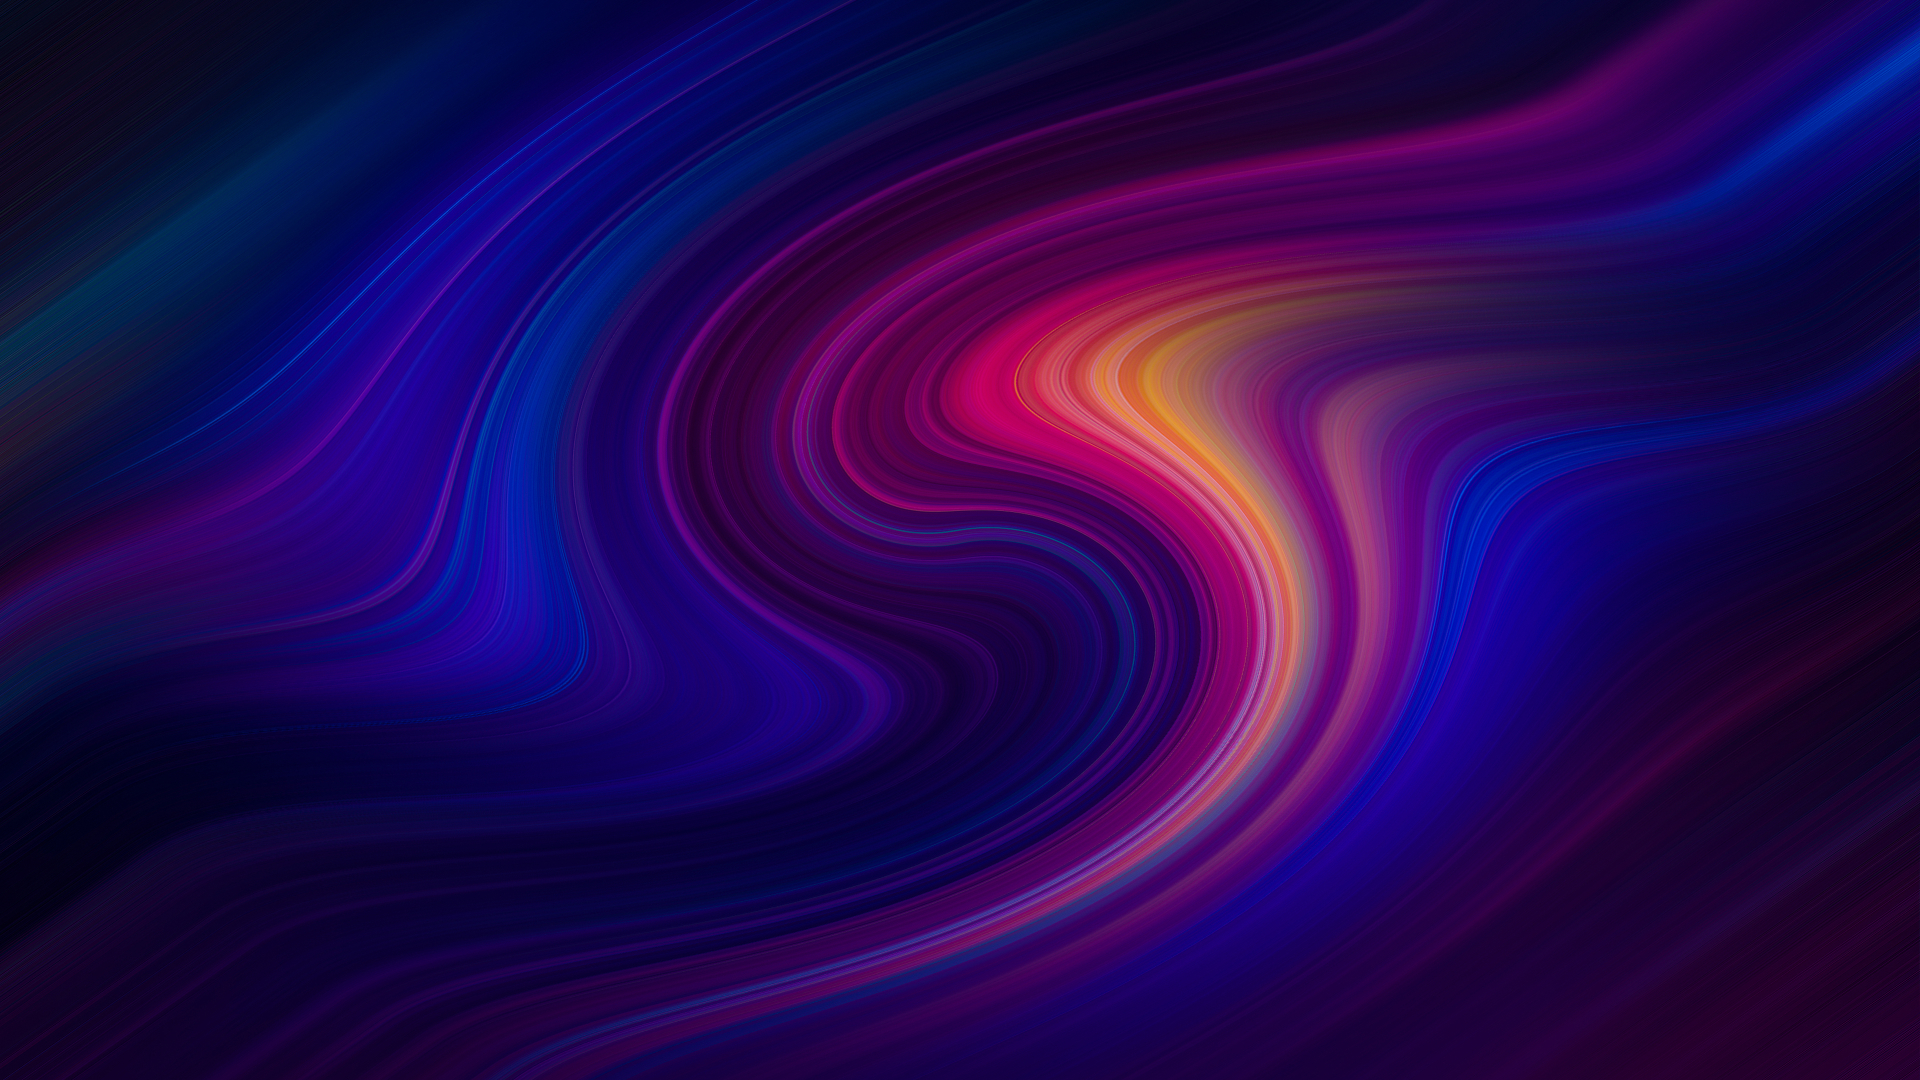 Free download 1920x1080 Swirl Digital Abstract 1080P Laptop Full HD  Wallpaper [1920x1080] for your Desktop, Mobile & Tablet | Explore 36+  Swirls Abstract 4k Wallpapers | Swirls Background, Wallpaper Abstract,  Background Abstract